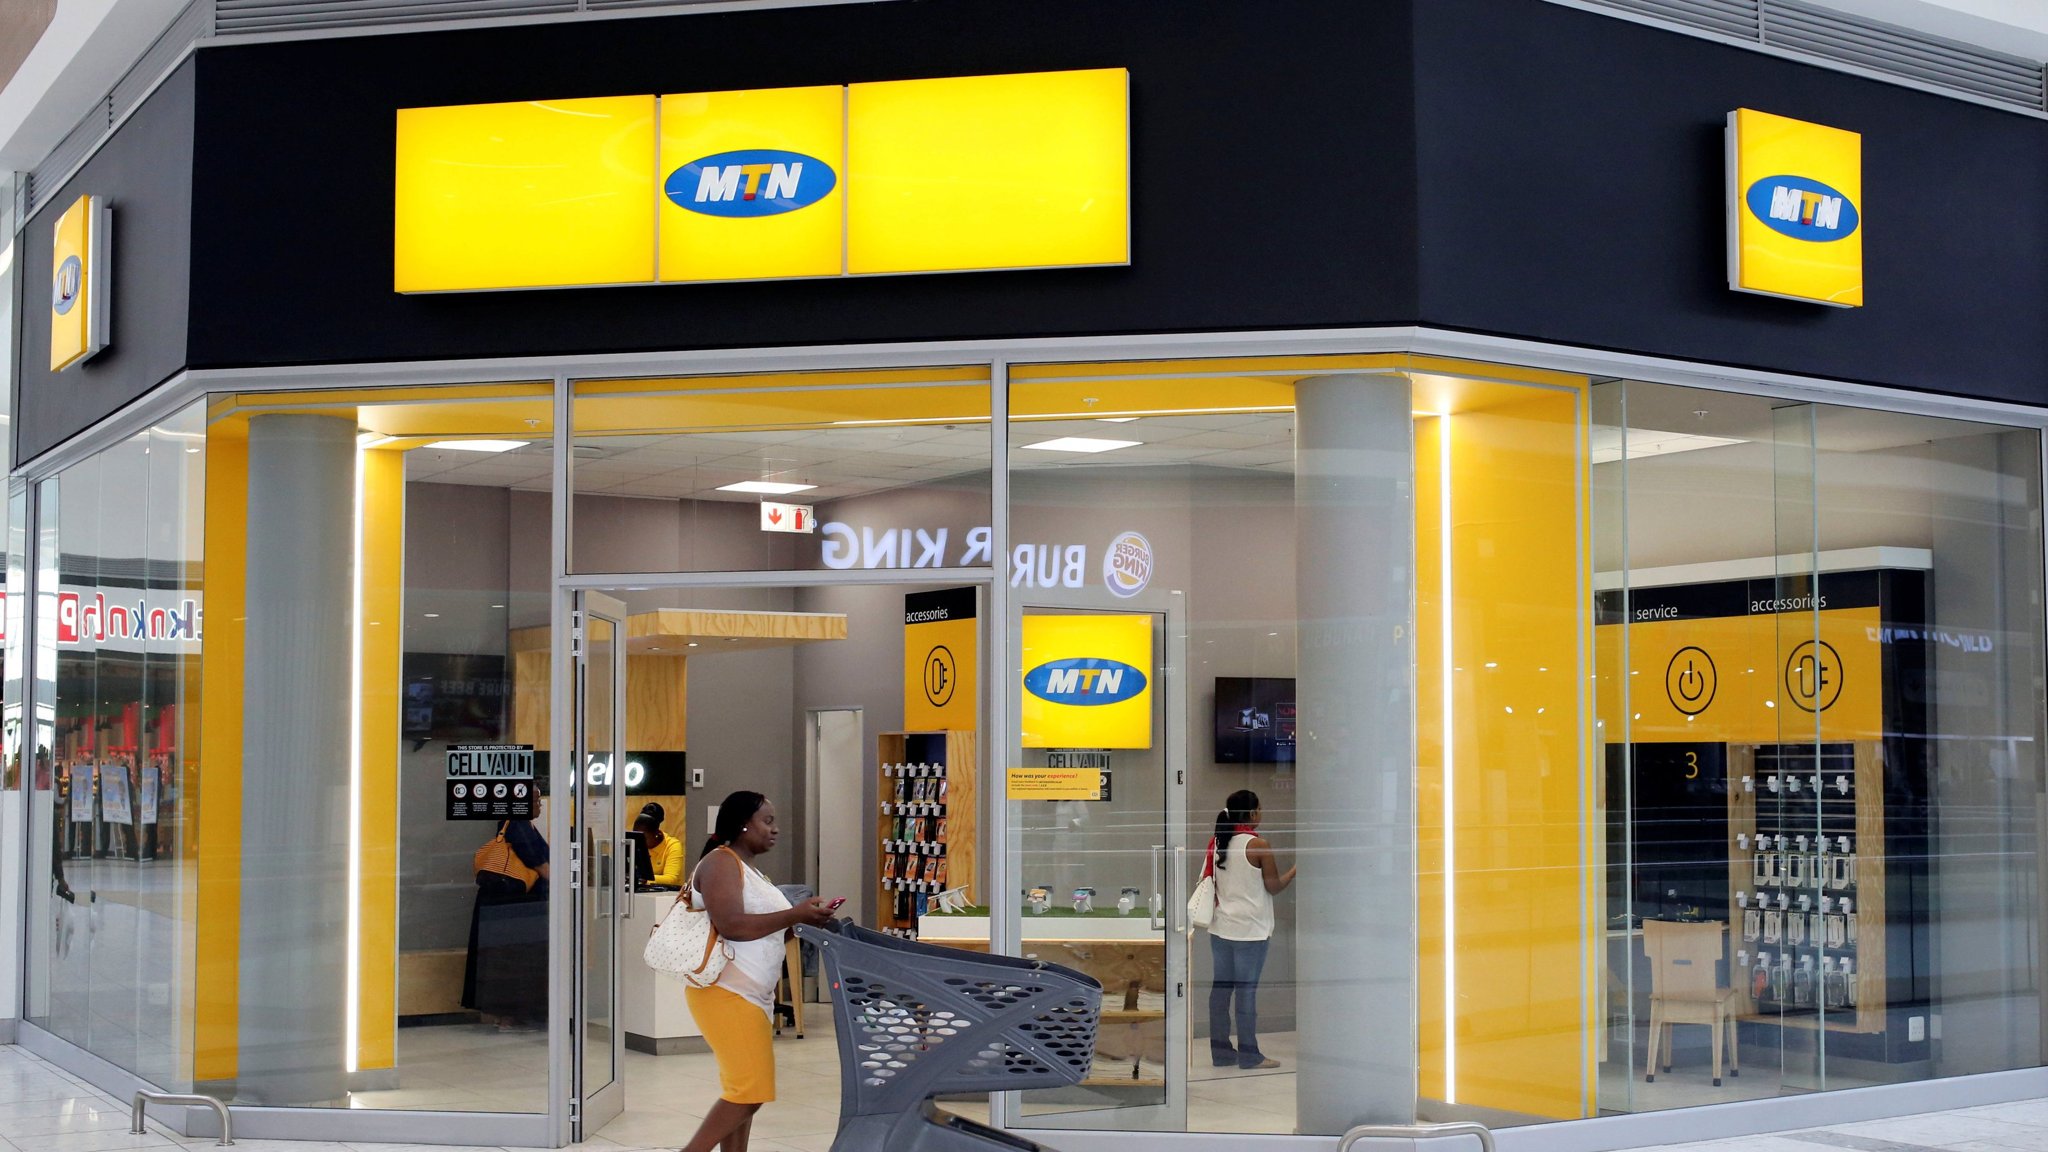 South Africa calls on MTN, Ghana to resolve $773m tax dispute